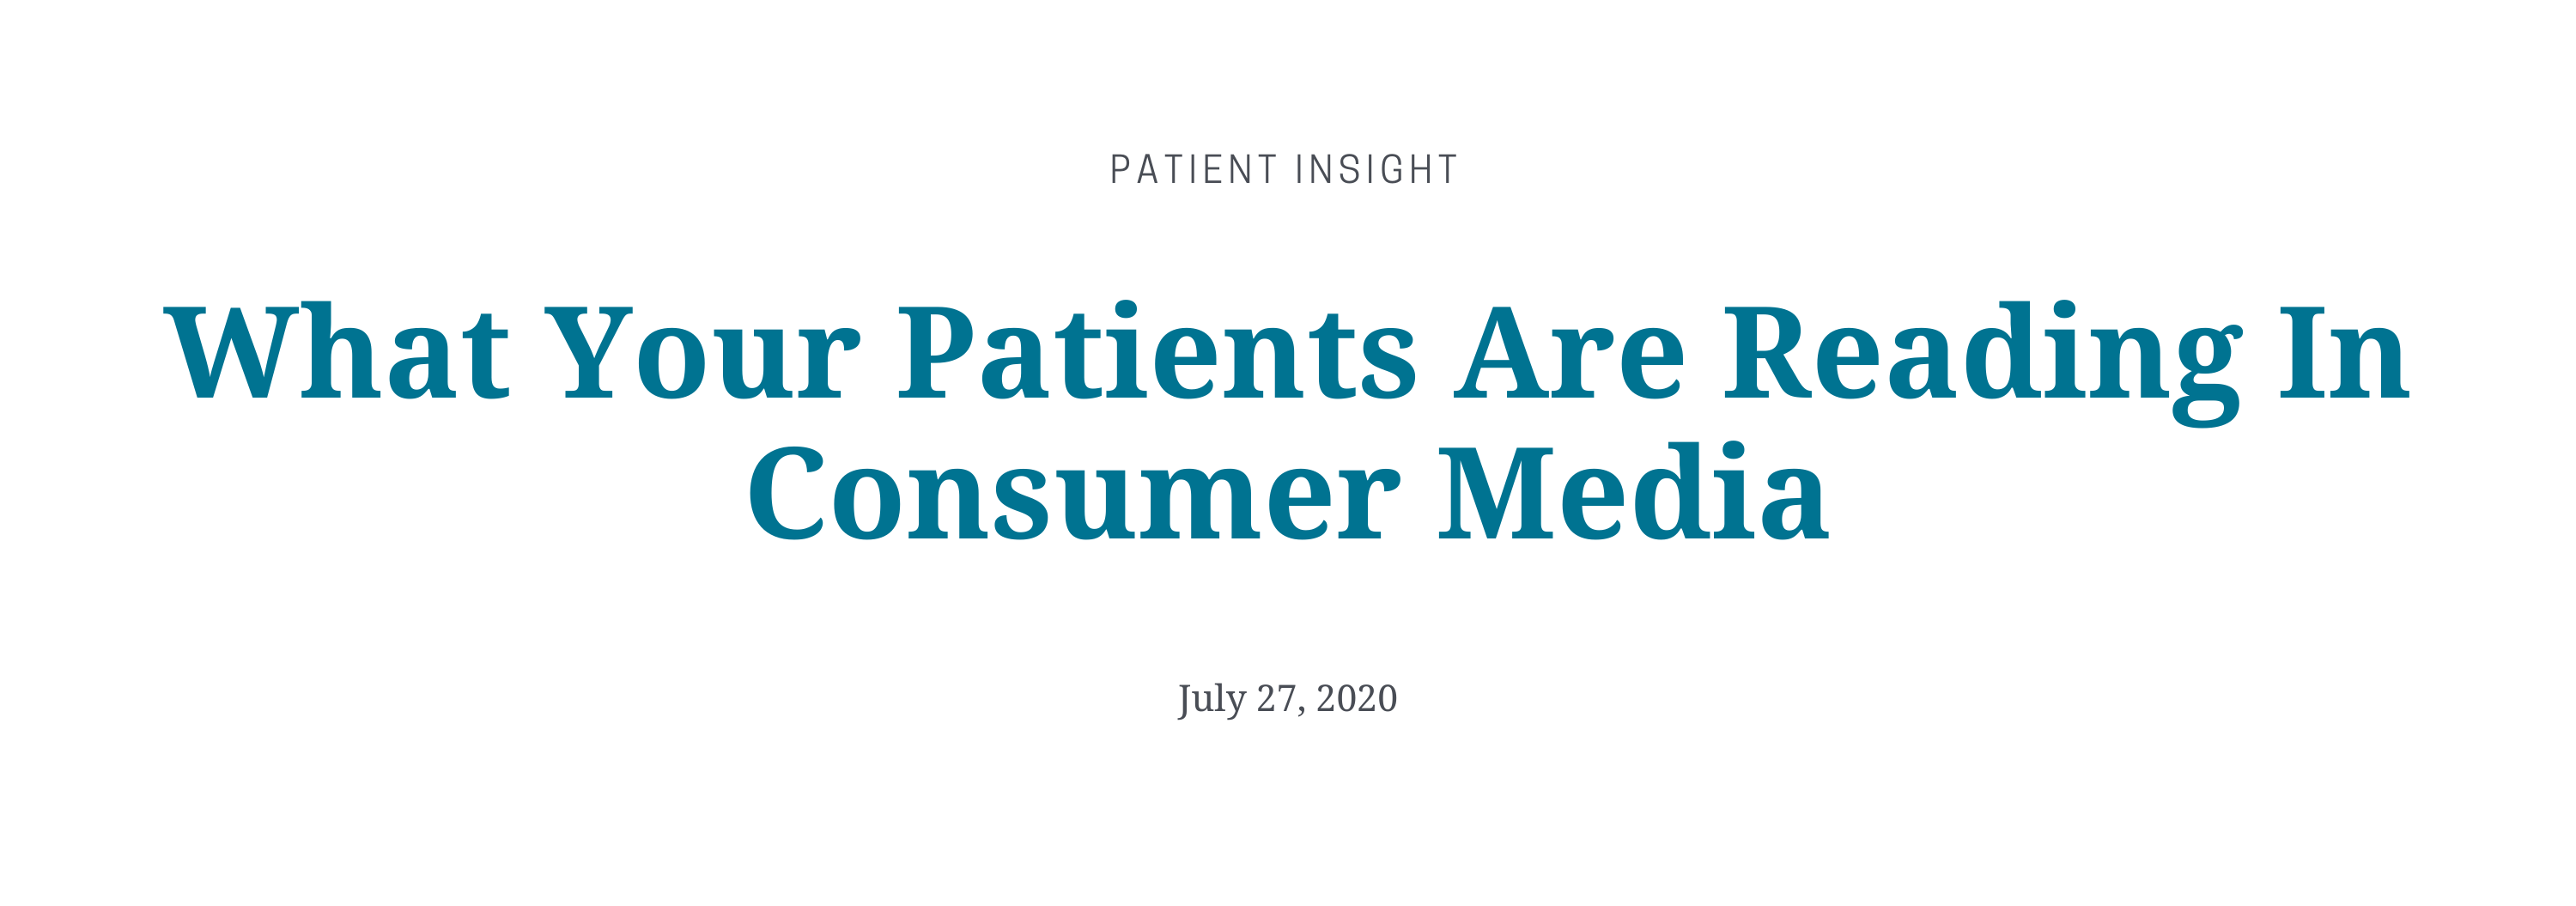 patient insight July 27